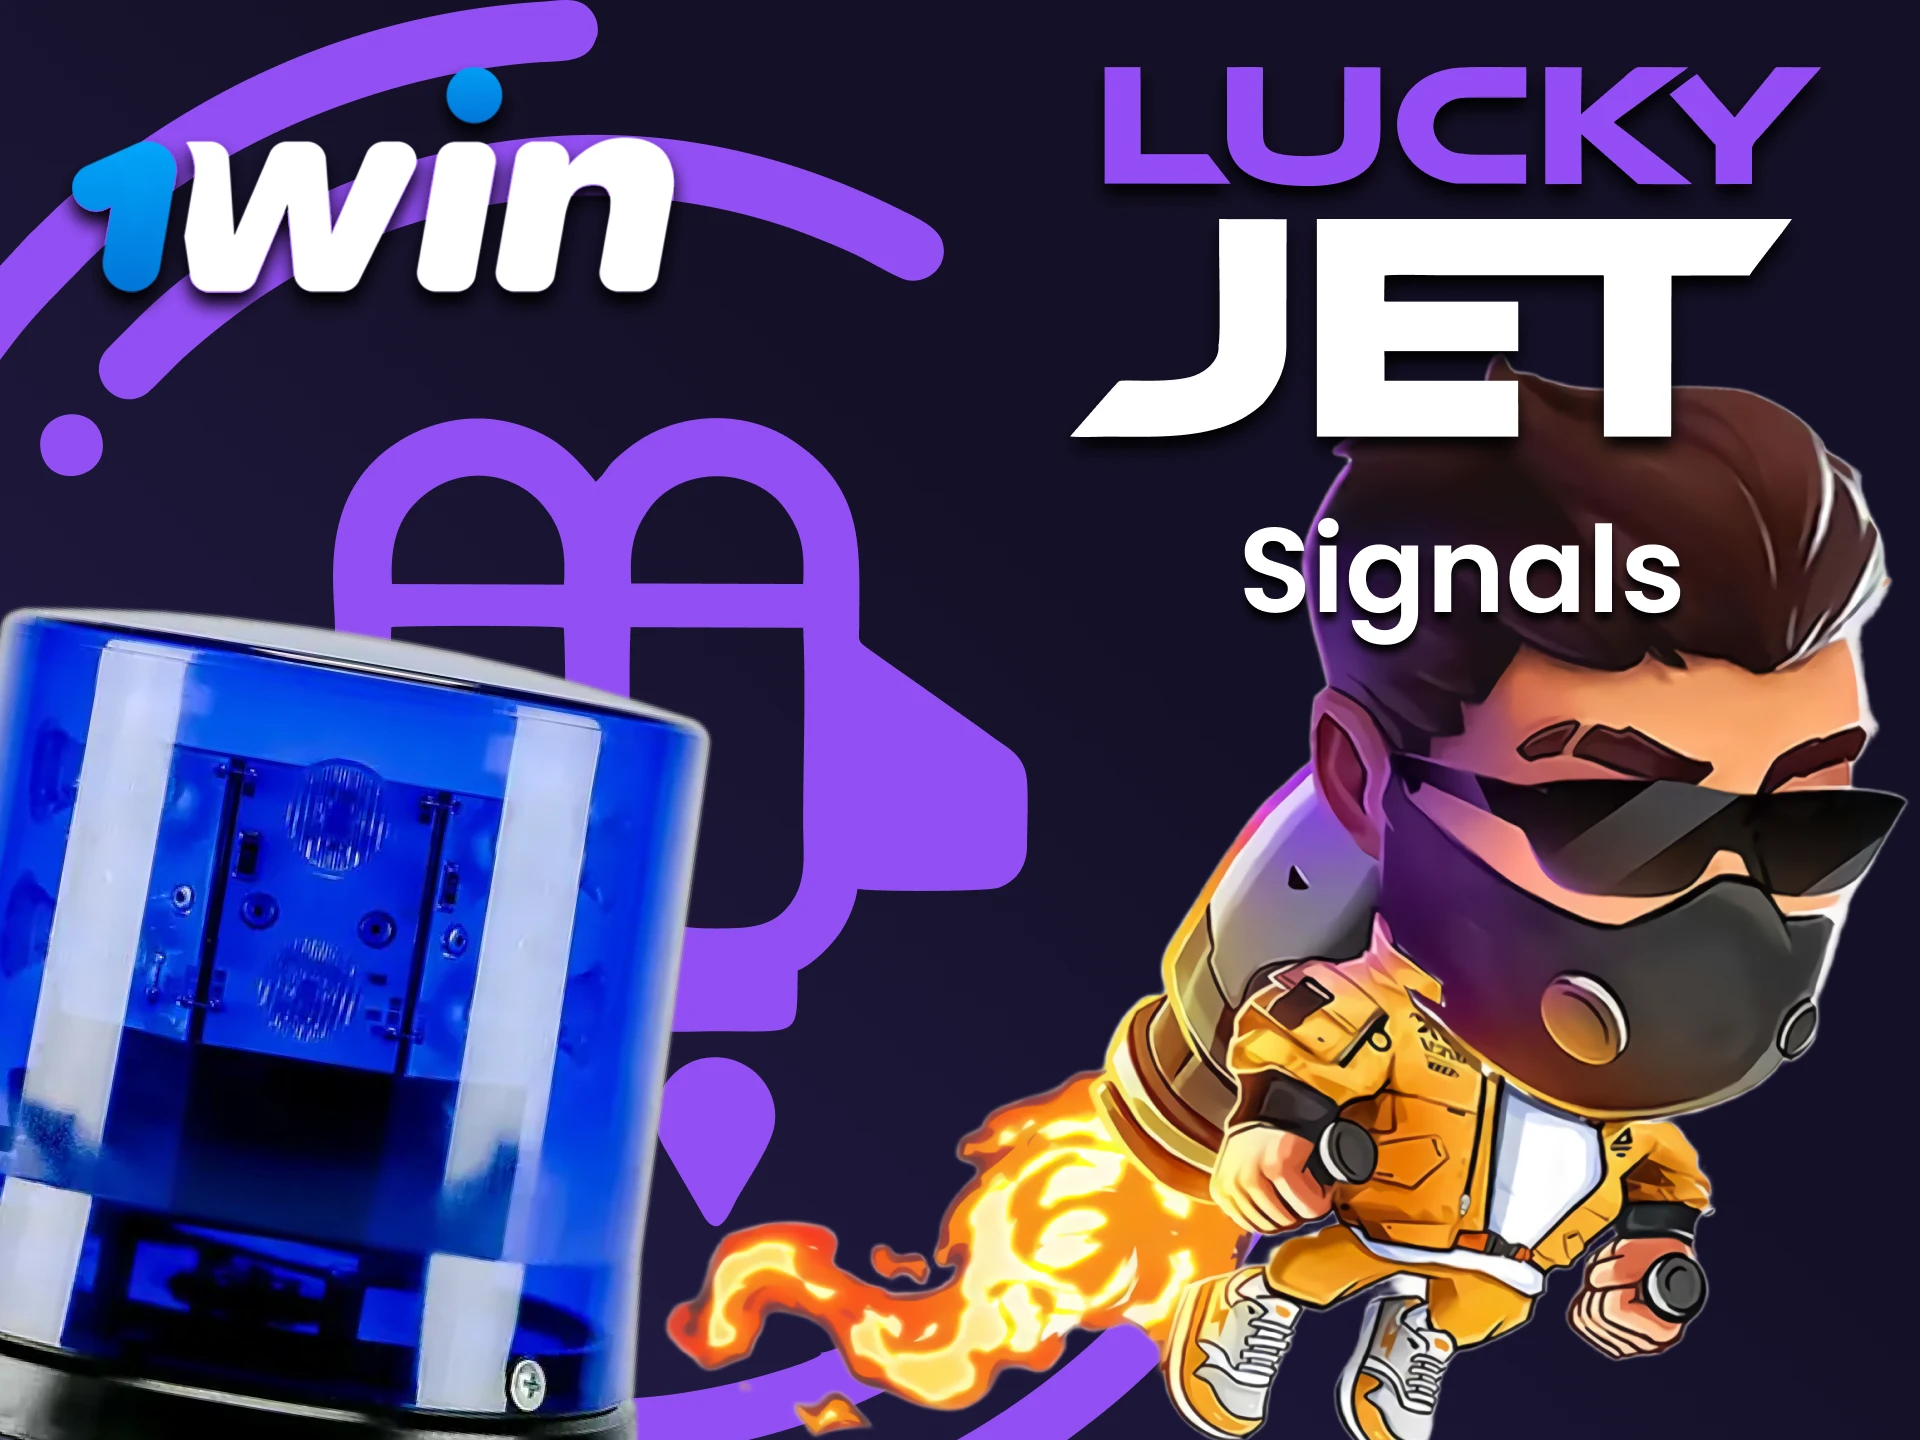 To play Lucky Jet, special signals are used.